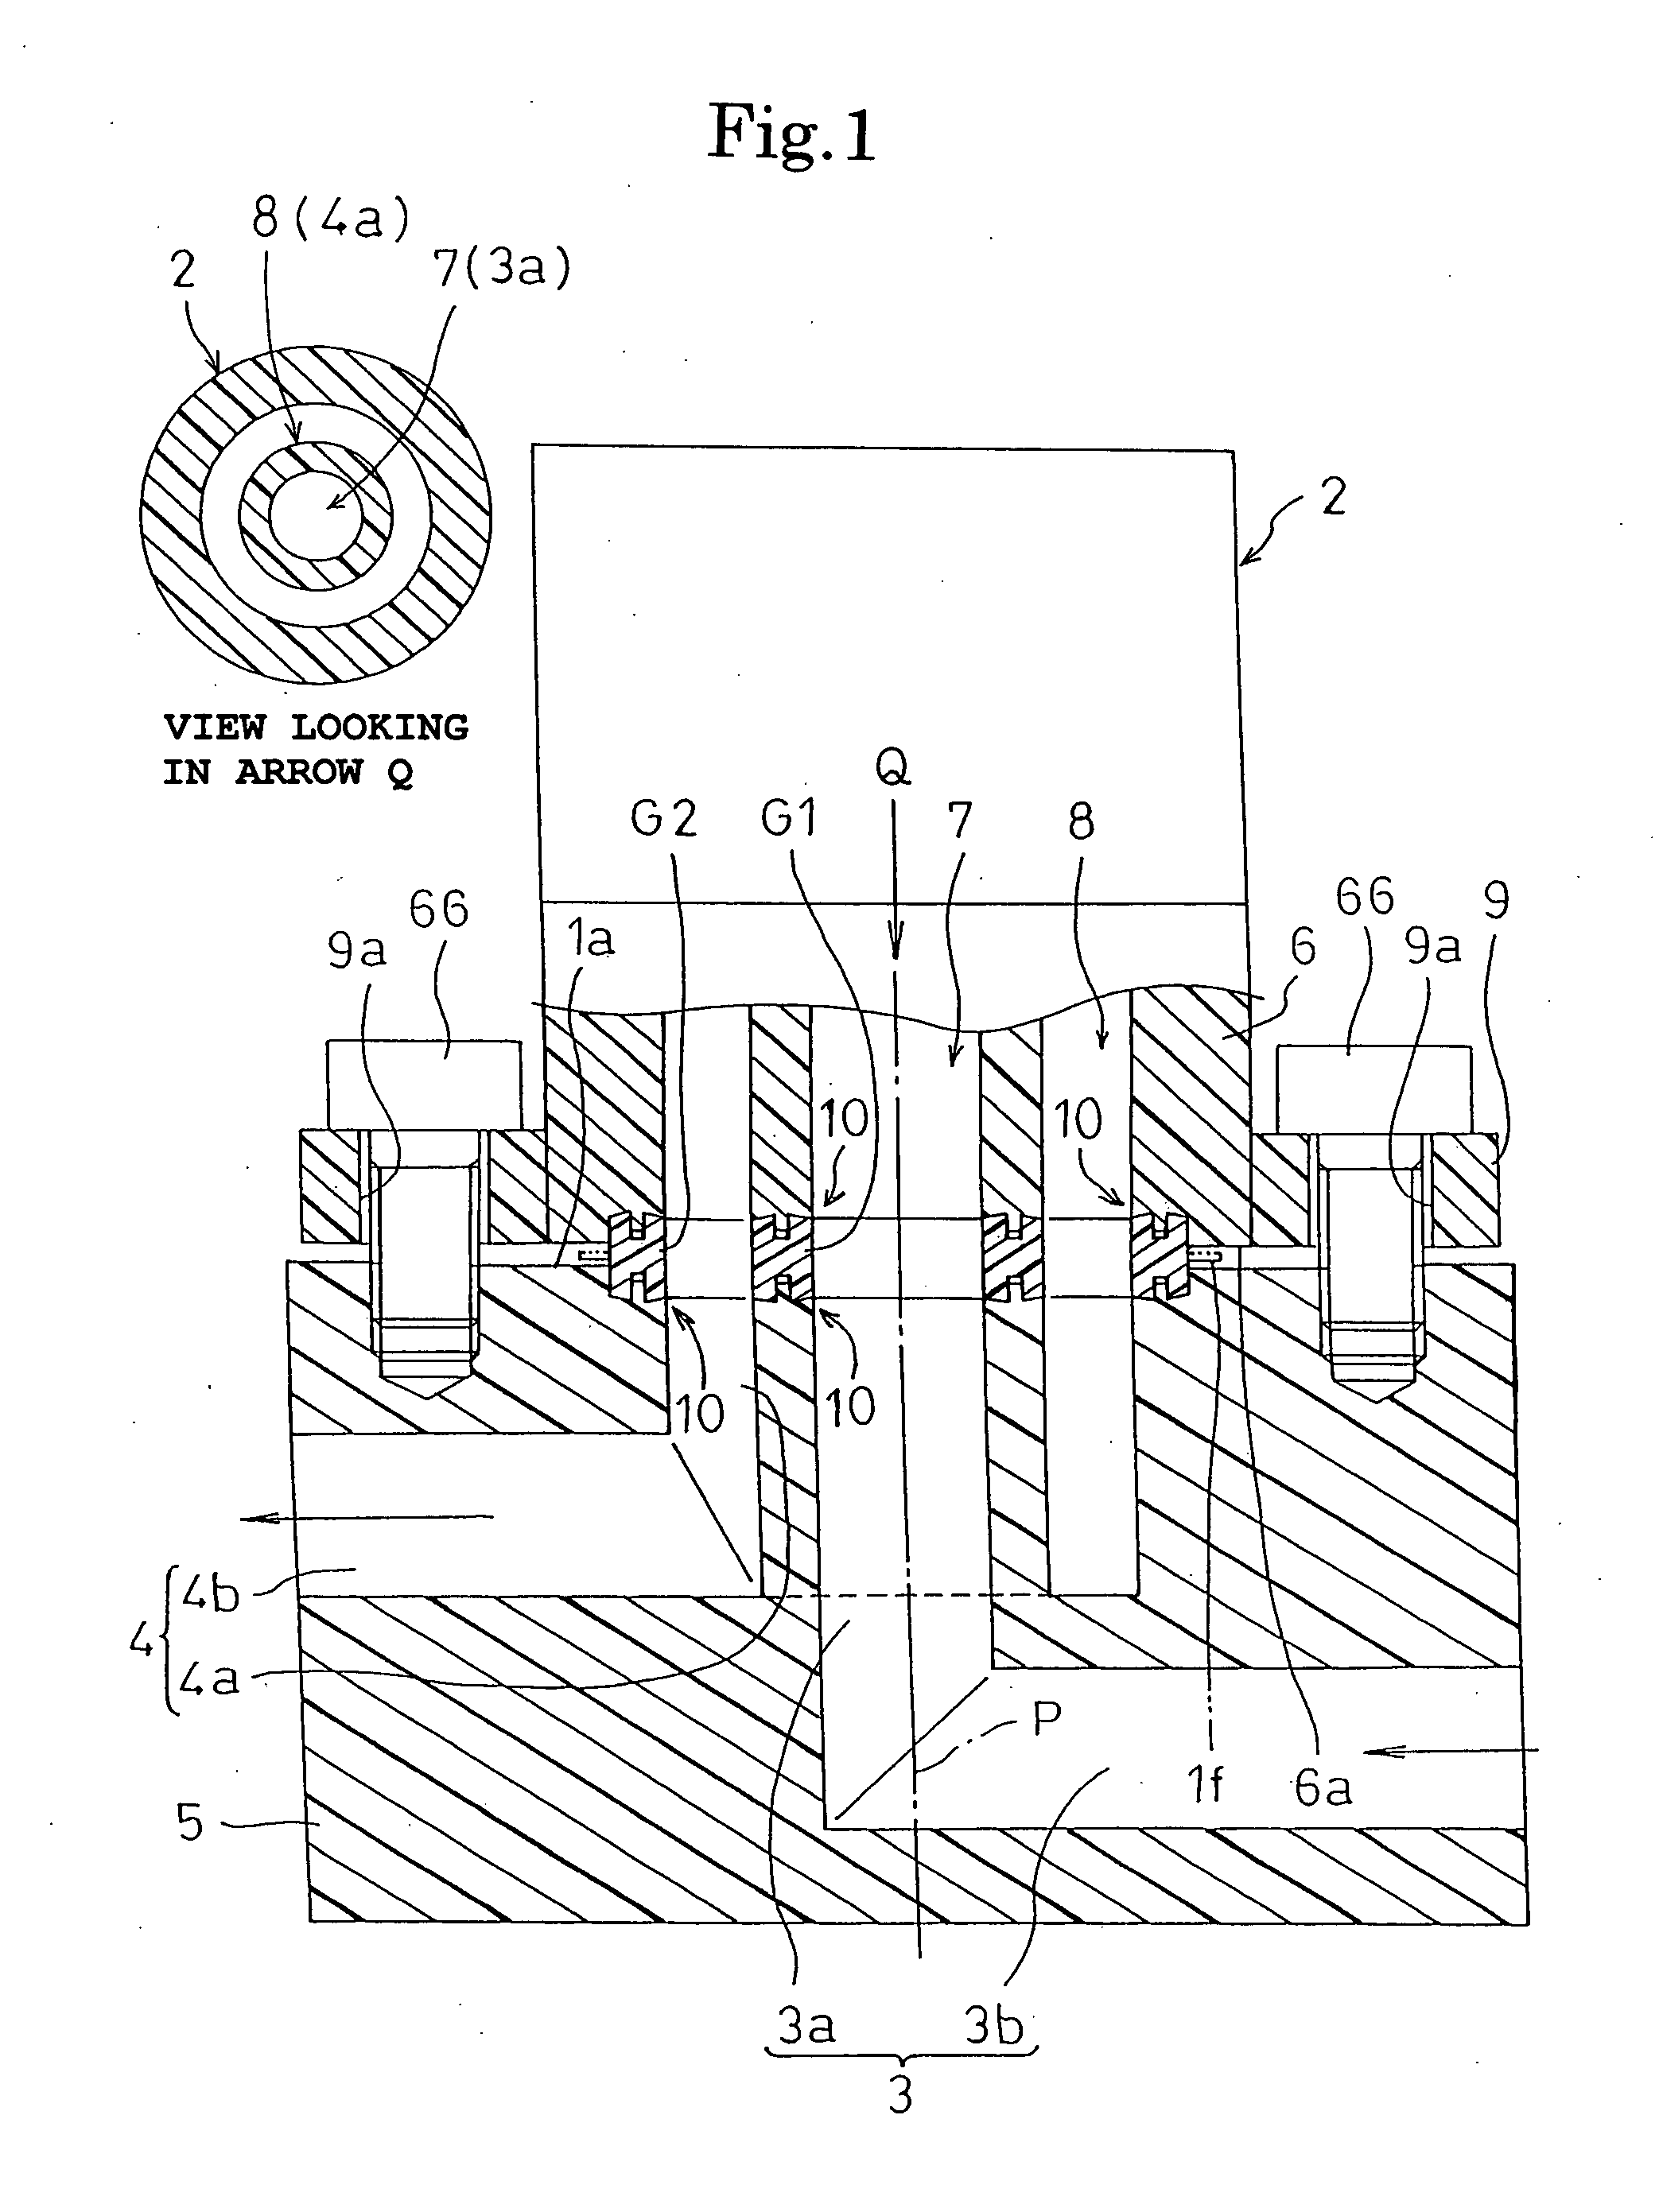 Structure for connection between integrated panel and fluid device